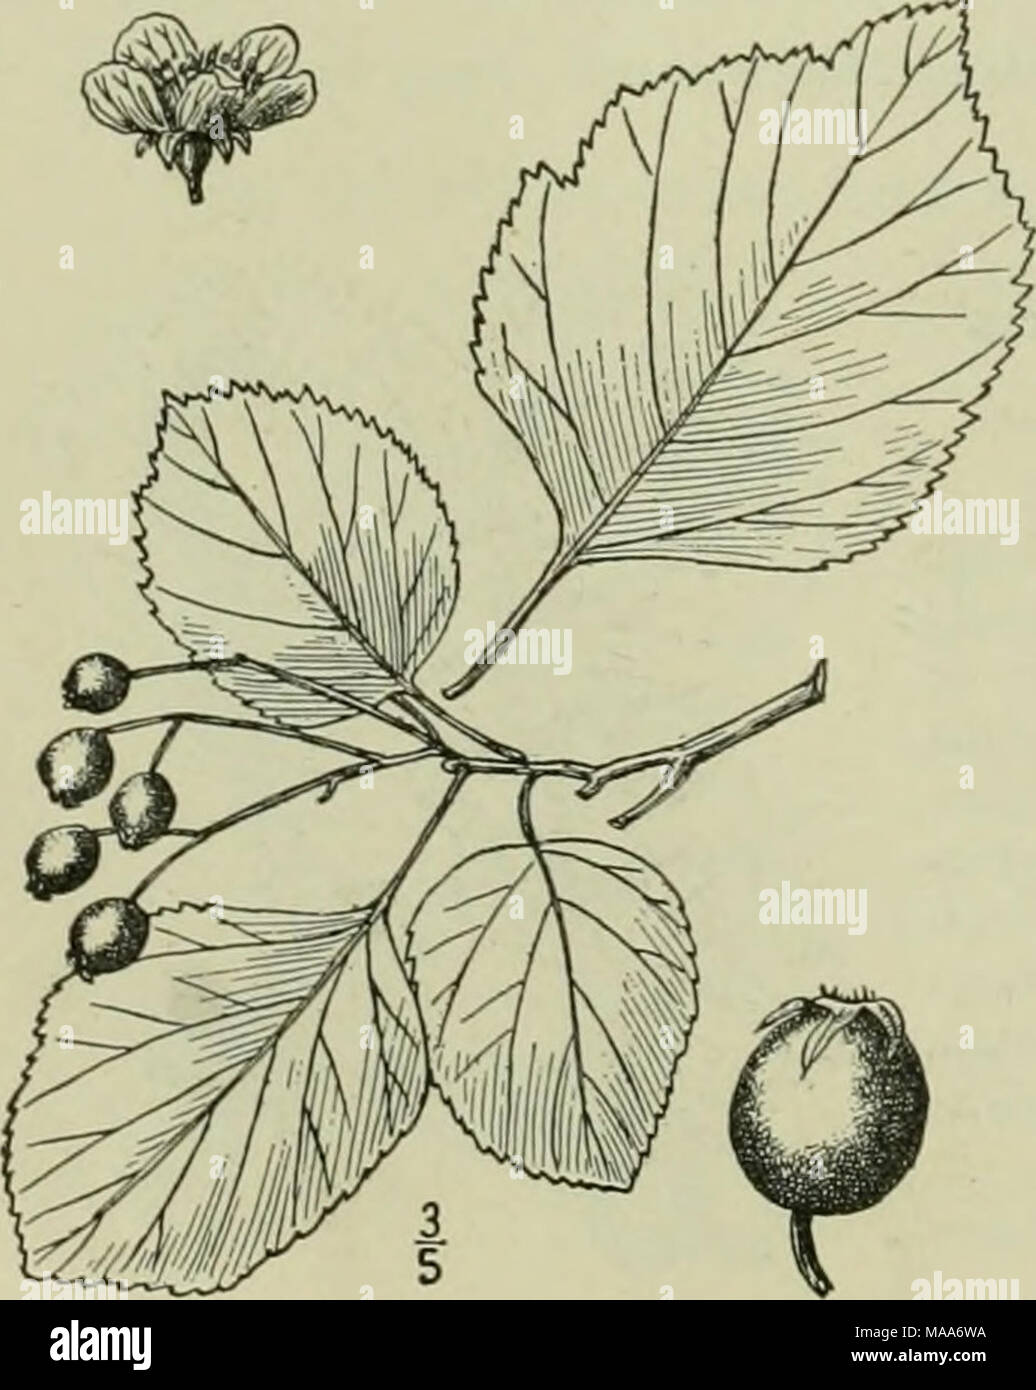 . An illustrated flora of the northern United States, Canada and the British possessions : from Newfoundland to the parallel of the southern boundary of Virginia and from the Atlantic Ocean westward to the 102nd meridian . 29. Crataegus ovata Sargent. Ovate- leaved Thorn. Fig. 2363. Sarg. Man. Trees A tree, sometimes 30° high, with yellow, scaly, bark similar to that of a young Piatanus, the spines i' long. Leaves ovate-elliptic or obovate, i Y-2I' long, S'-2' wide, obtuse or acute at the apex, broadly cuneate or rounded at the base, coarsely serrate or doubly serrate, often with irregular cre Stock Photo